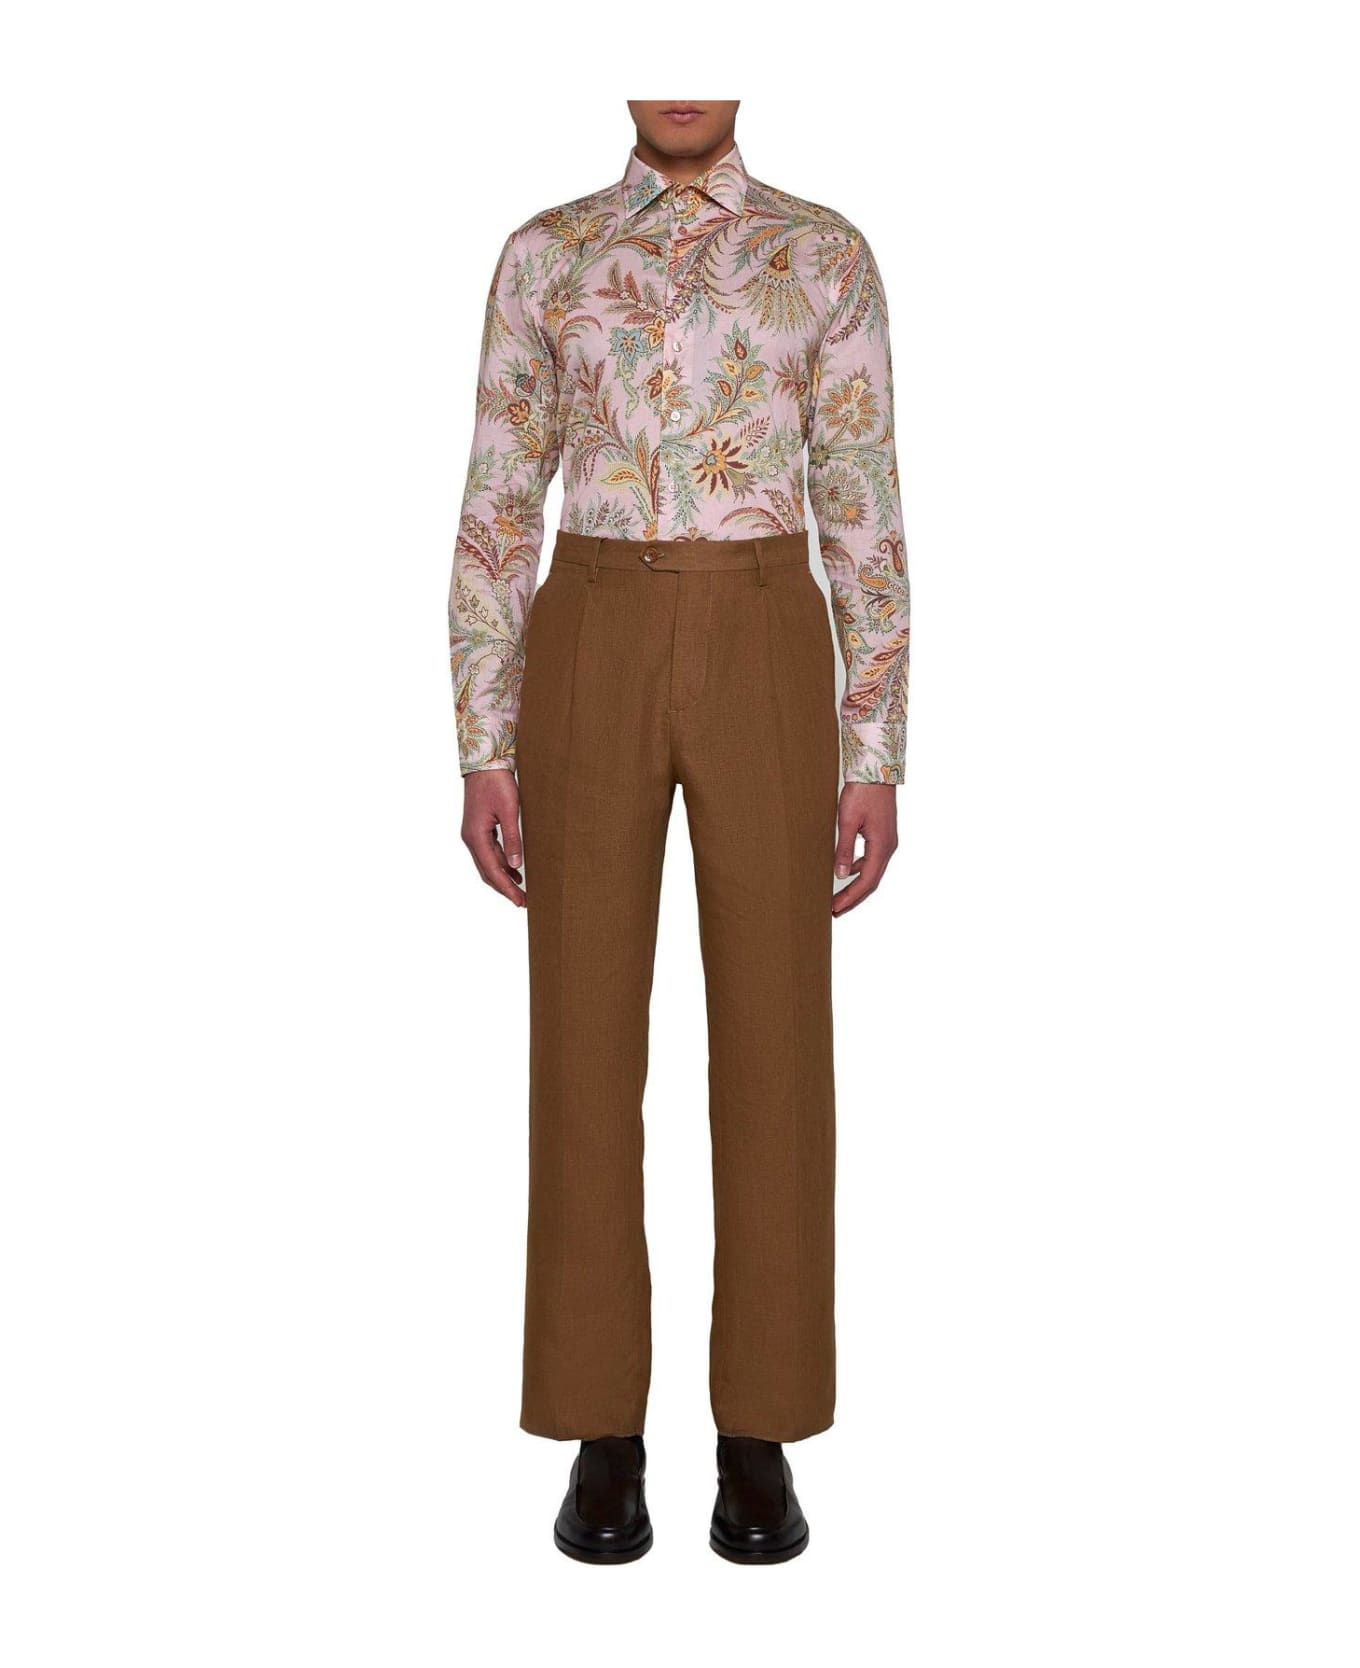 Etro Floral Printed Long-sleeved Shirt - Stampa f.do rosa